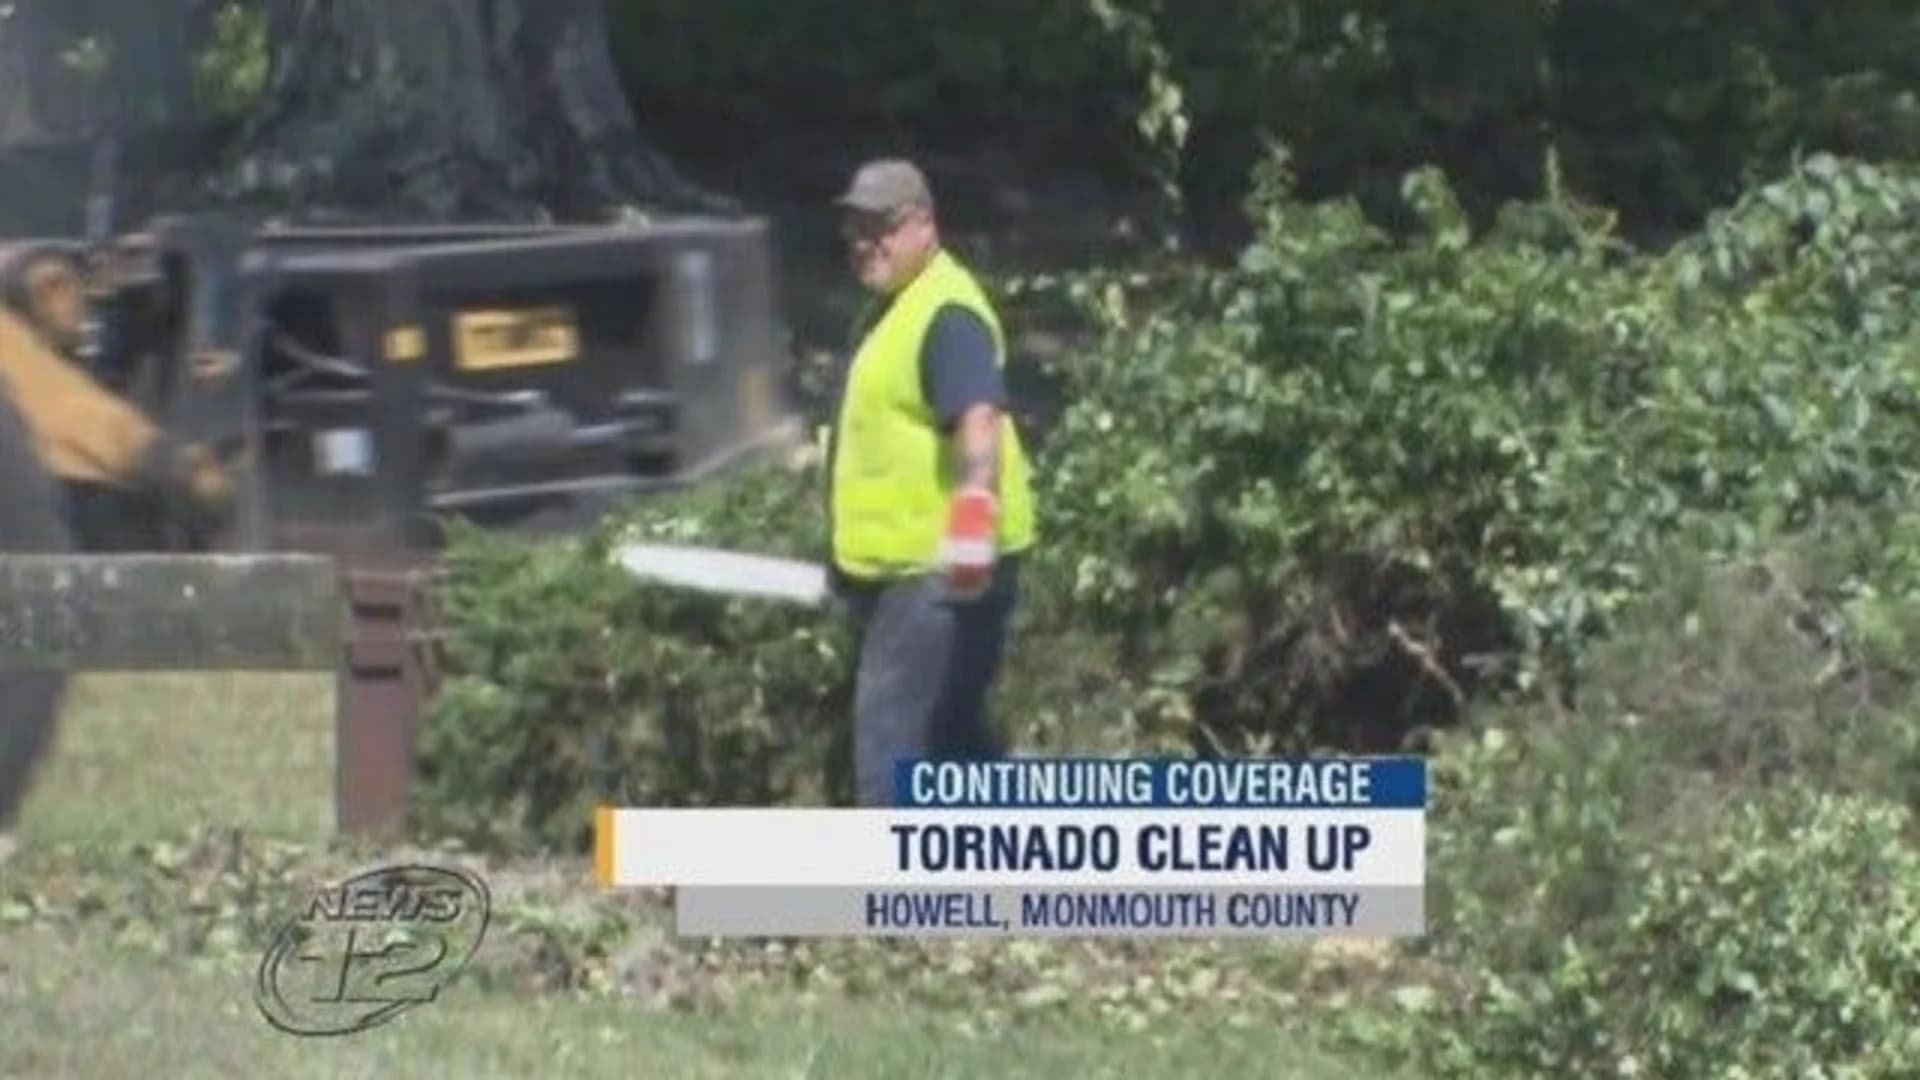 Cleanup continues after 2 tornadoes touch down in Howell